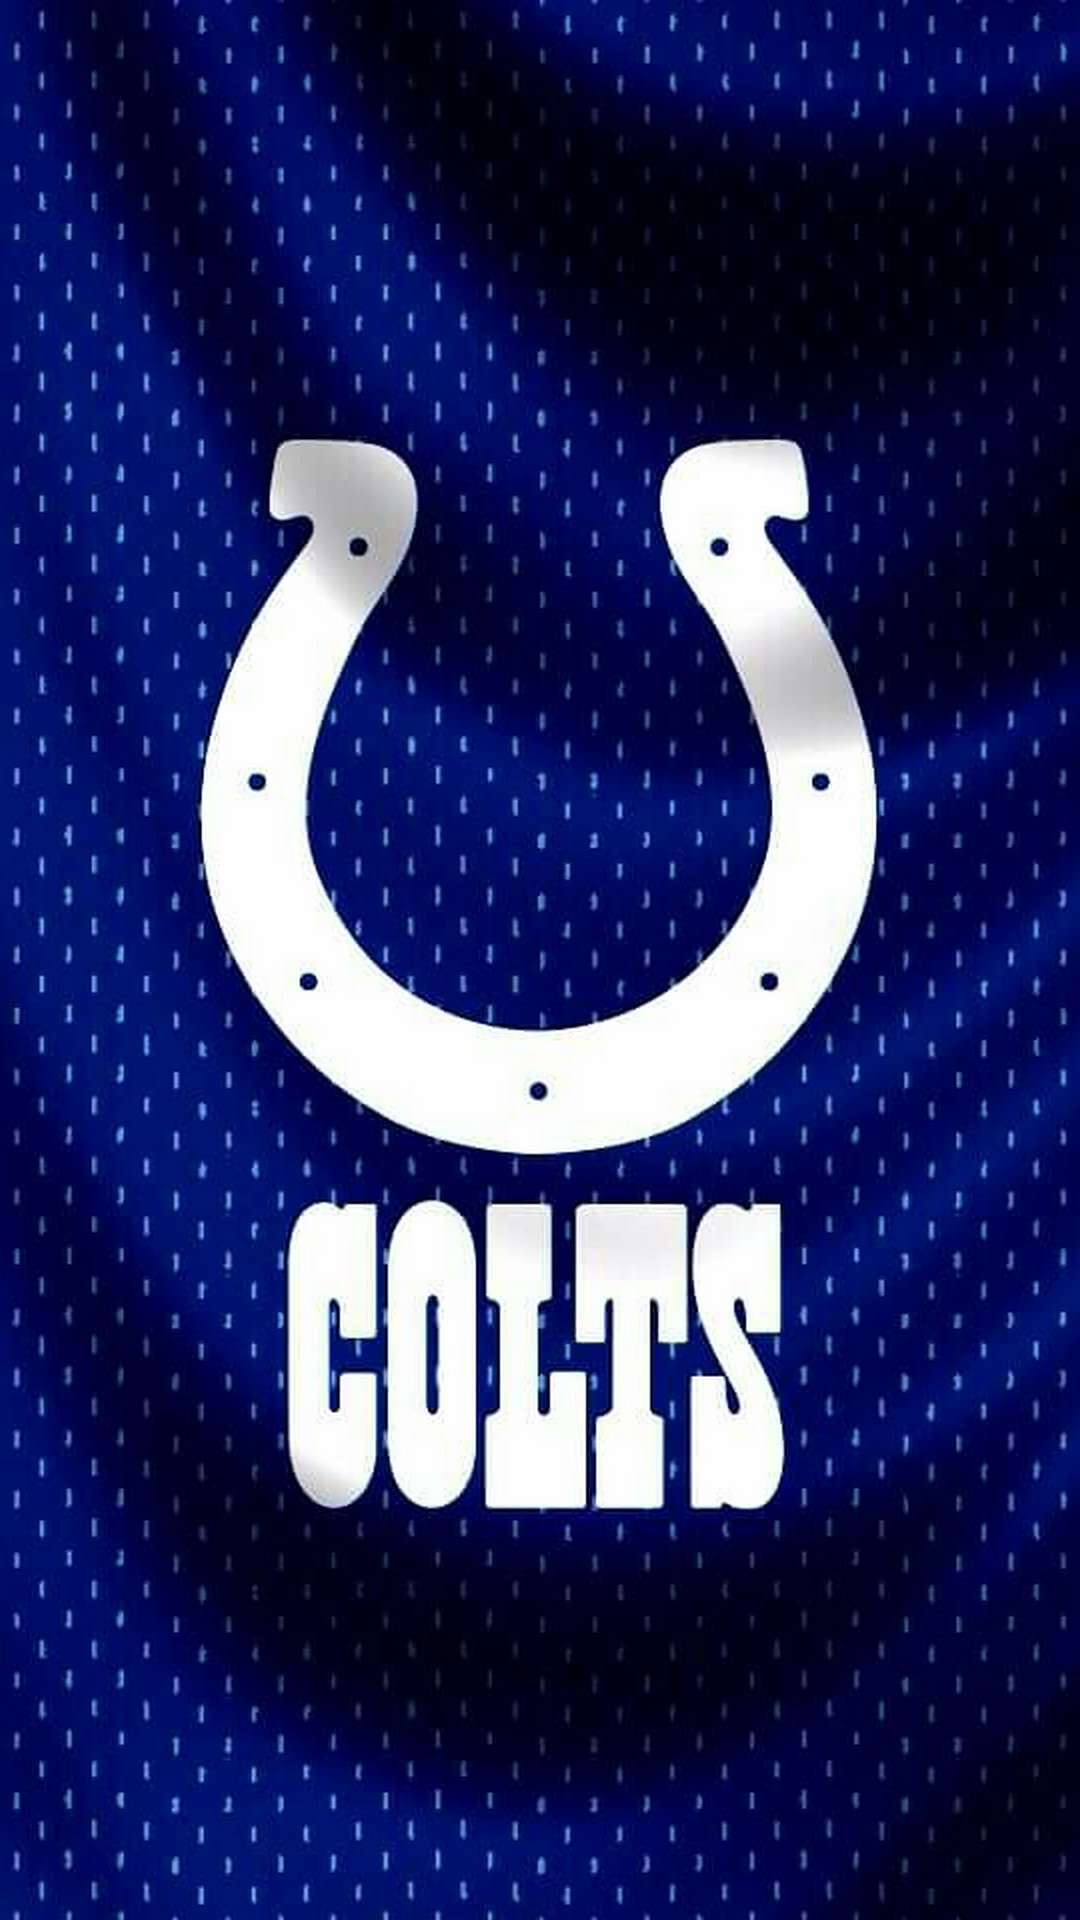 Indianapolis Colts iPhone Screen Wallpaper with high-resolution 1080x1920 pixel. Donwload and set as wallpaper for your iPhone X, iPhone XS home screen backgrounds, XS Max, XR, iPhone8 lock screen wallpaper, iPhone 7, 6, SE and other mobile devices